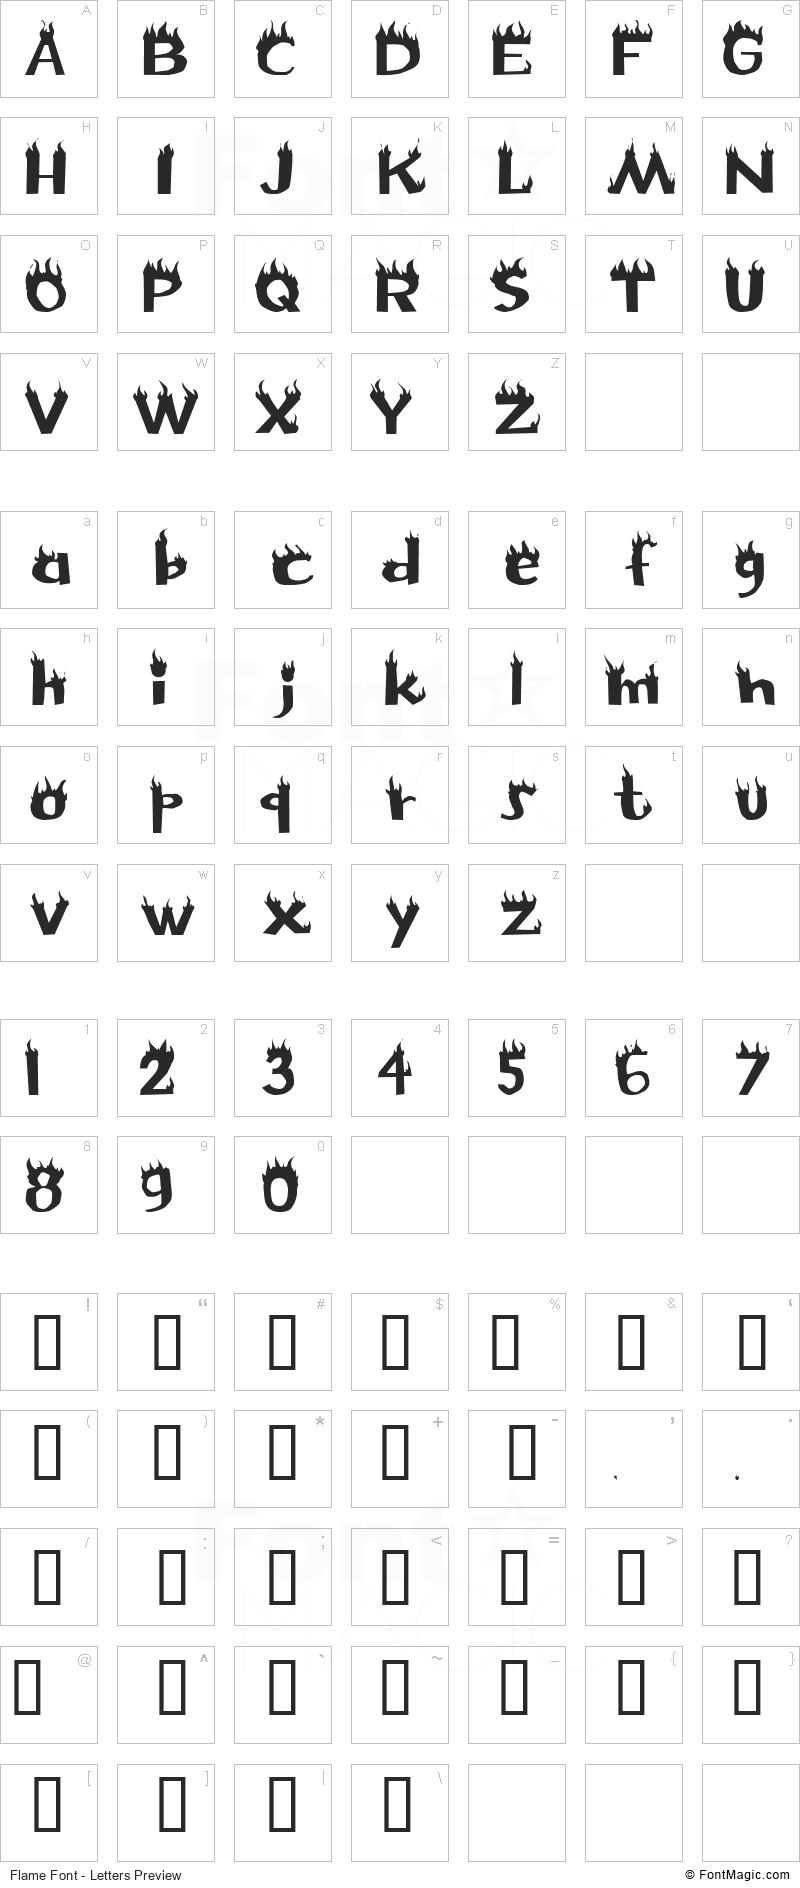 Flame Font - All Latters Preview Chart